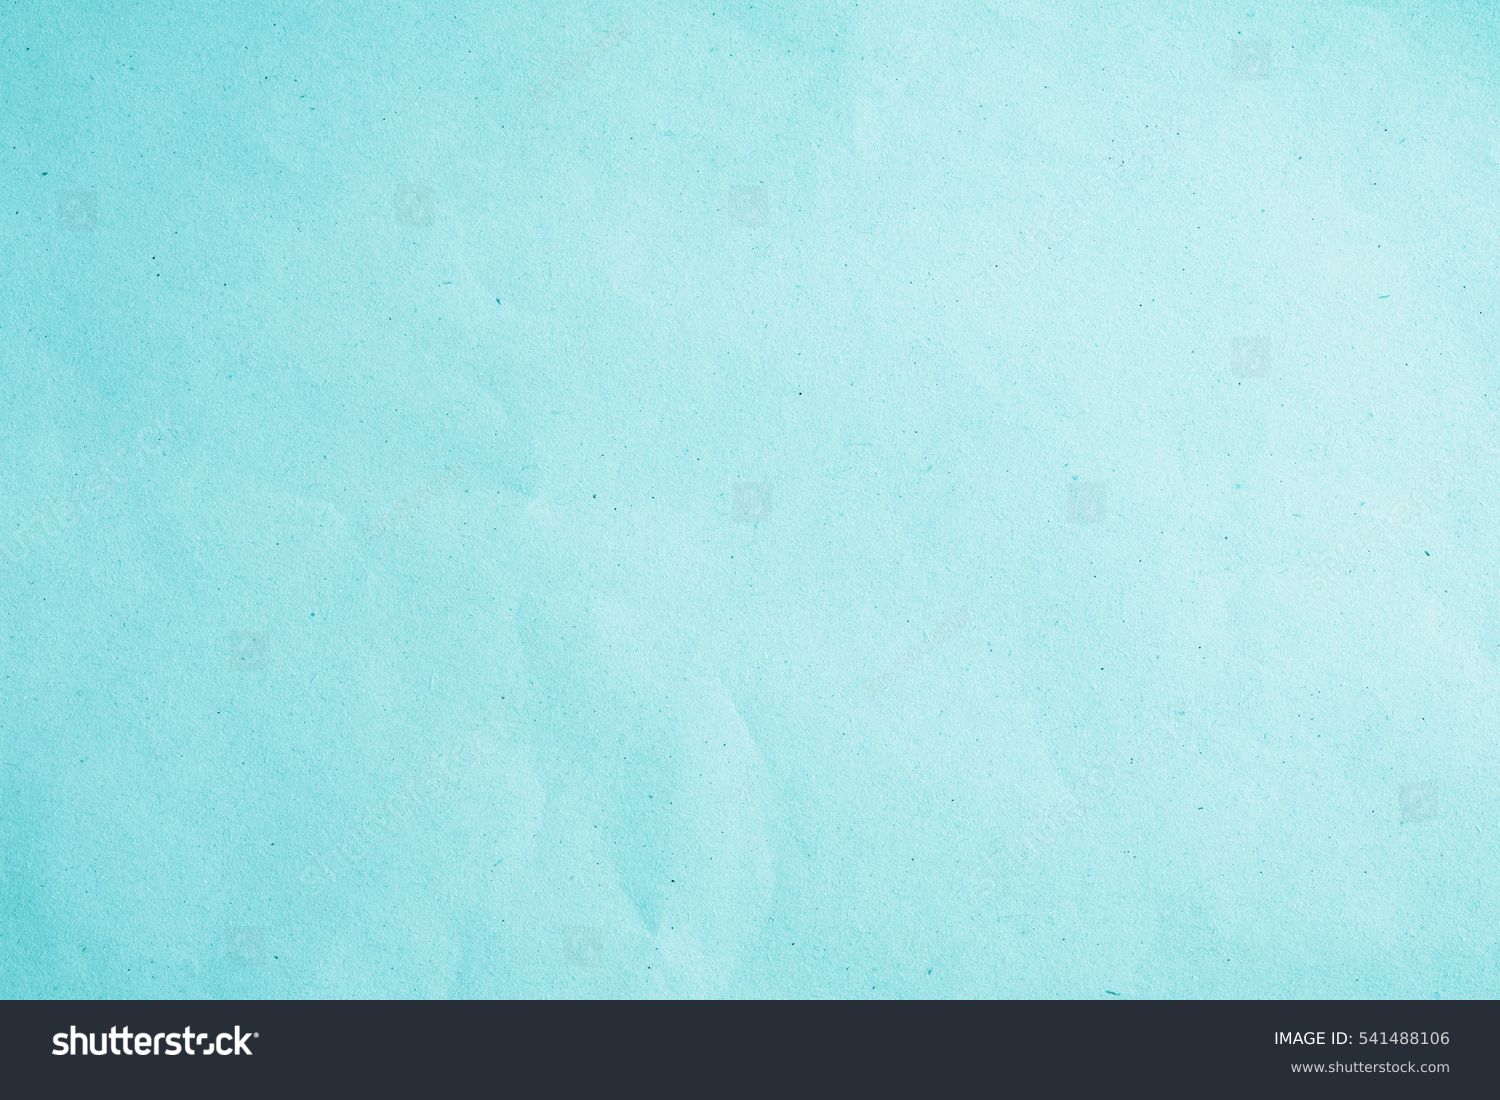 Smooth flat vintage paper bag pale texture in light blue color on table background. Organic soft turquoise plain back craft book concept for simplicity azure teal scrap backdrop, black simple surface #541488106